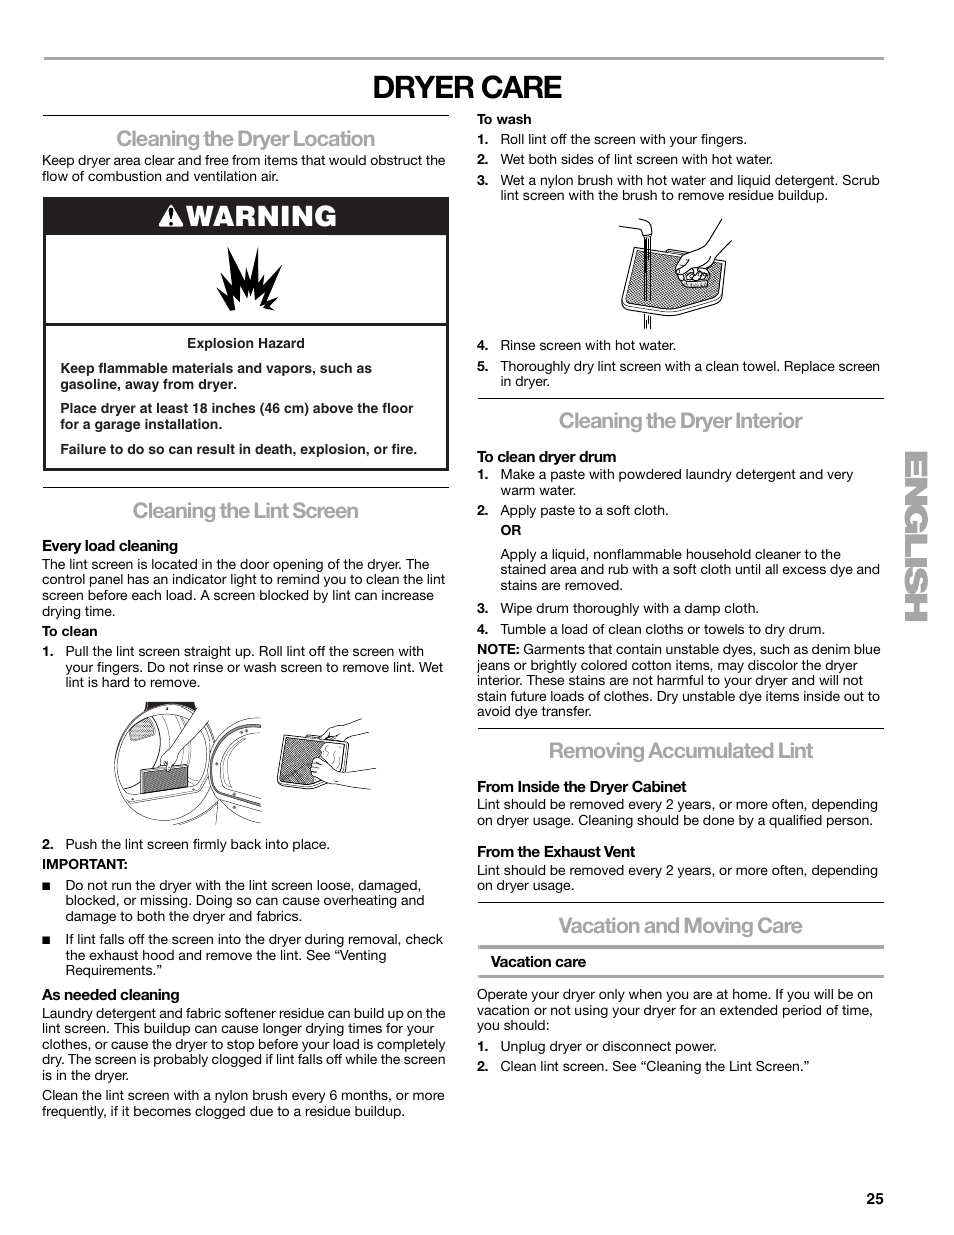 Dryer Care Warning Cleaning The Dryer Location Kenmore Elite He5 110 8708 User Manual Page 25 56 Original Mode